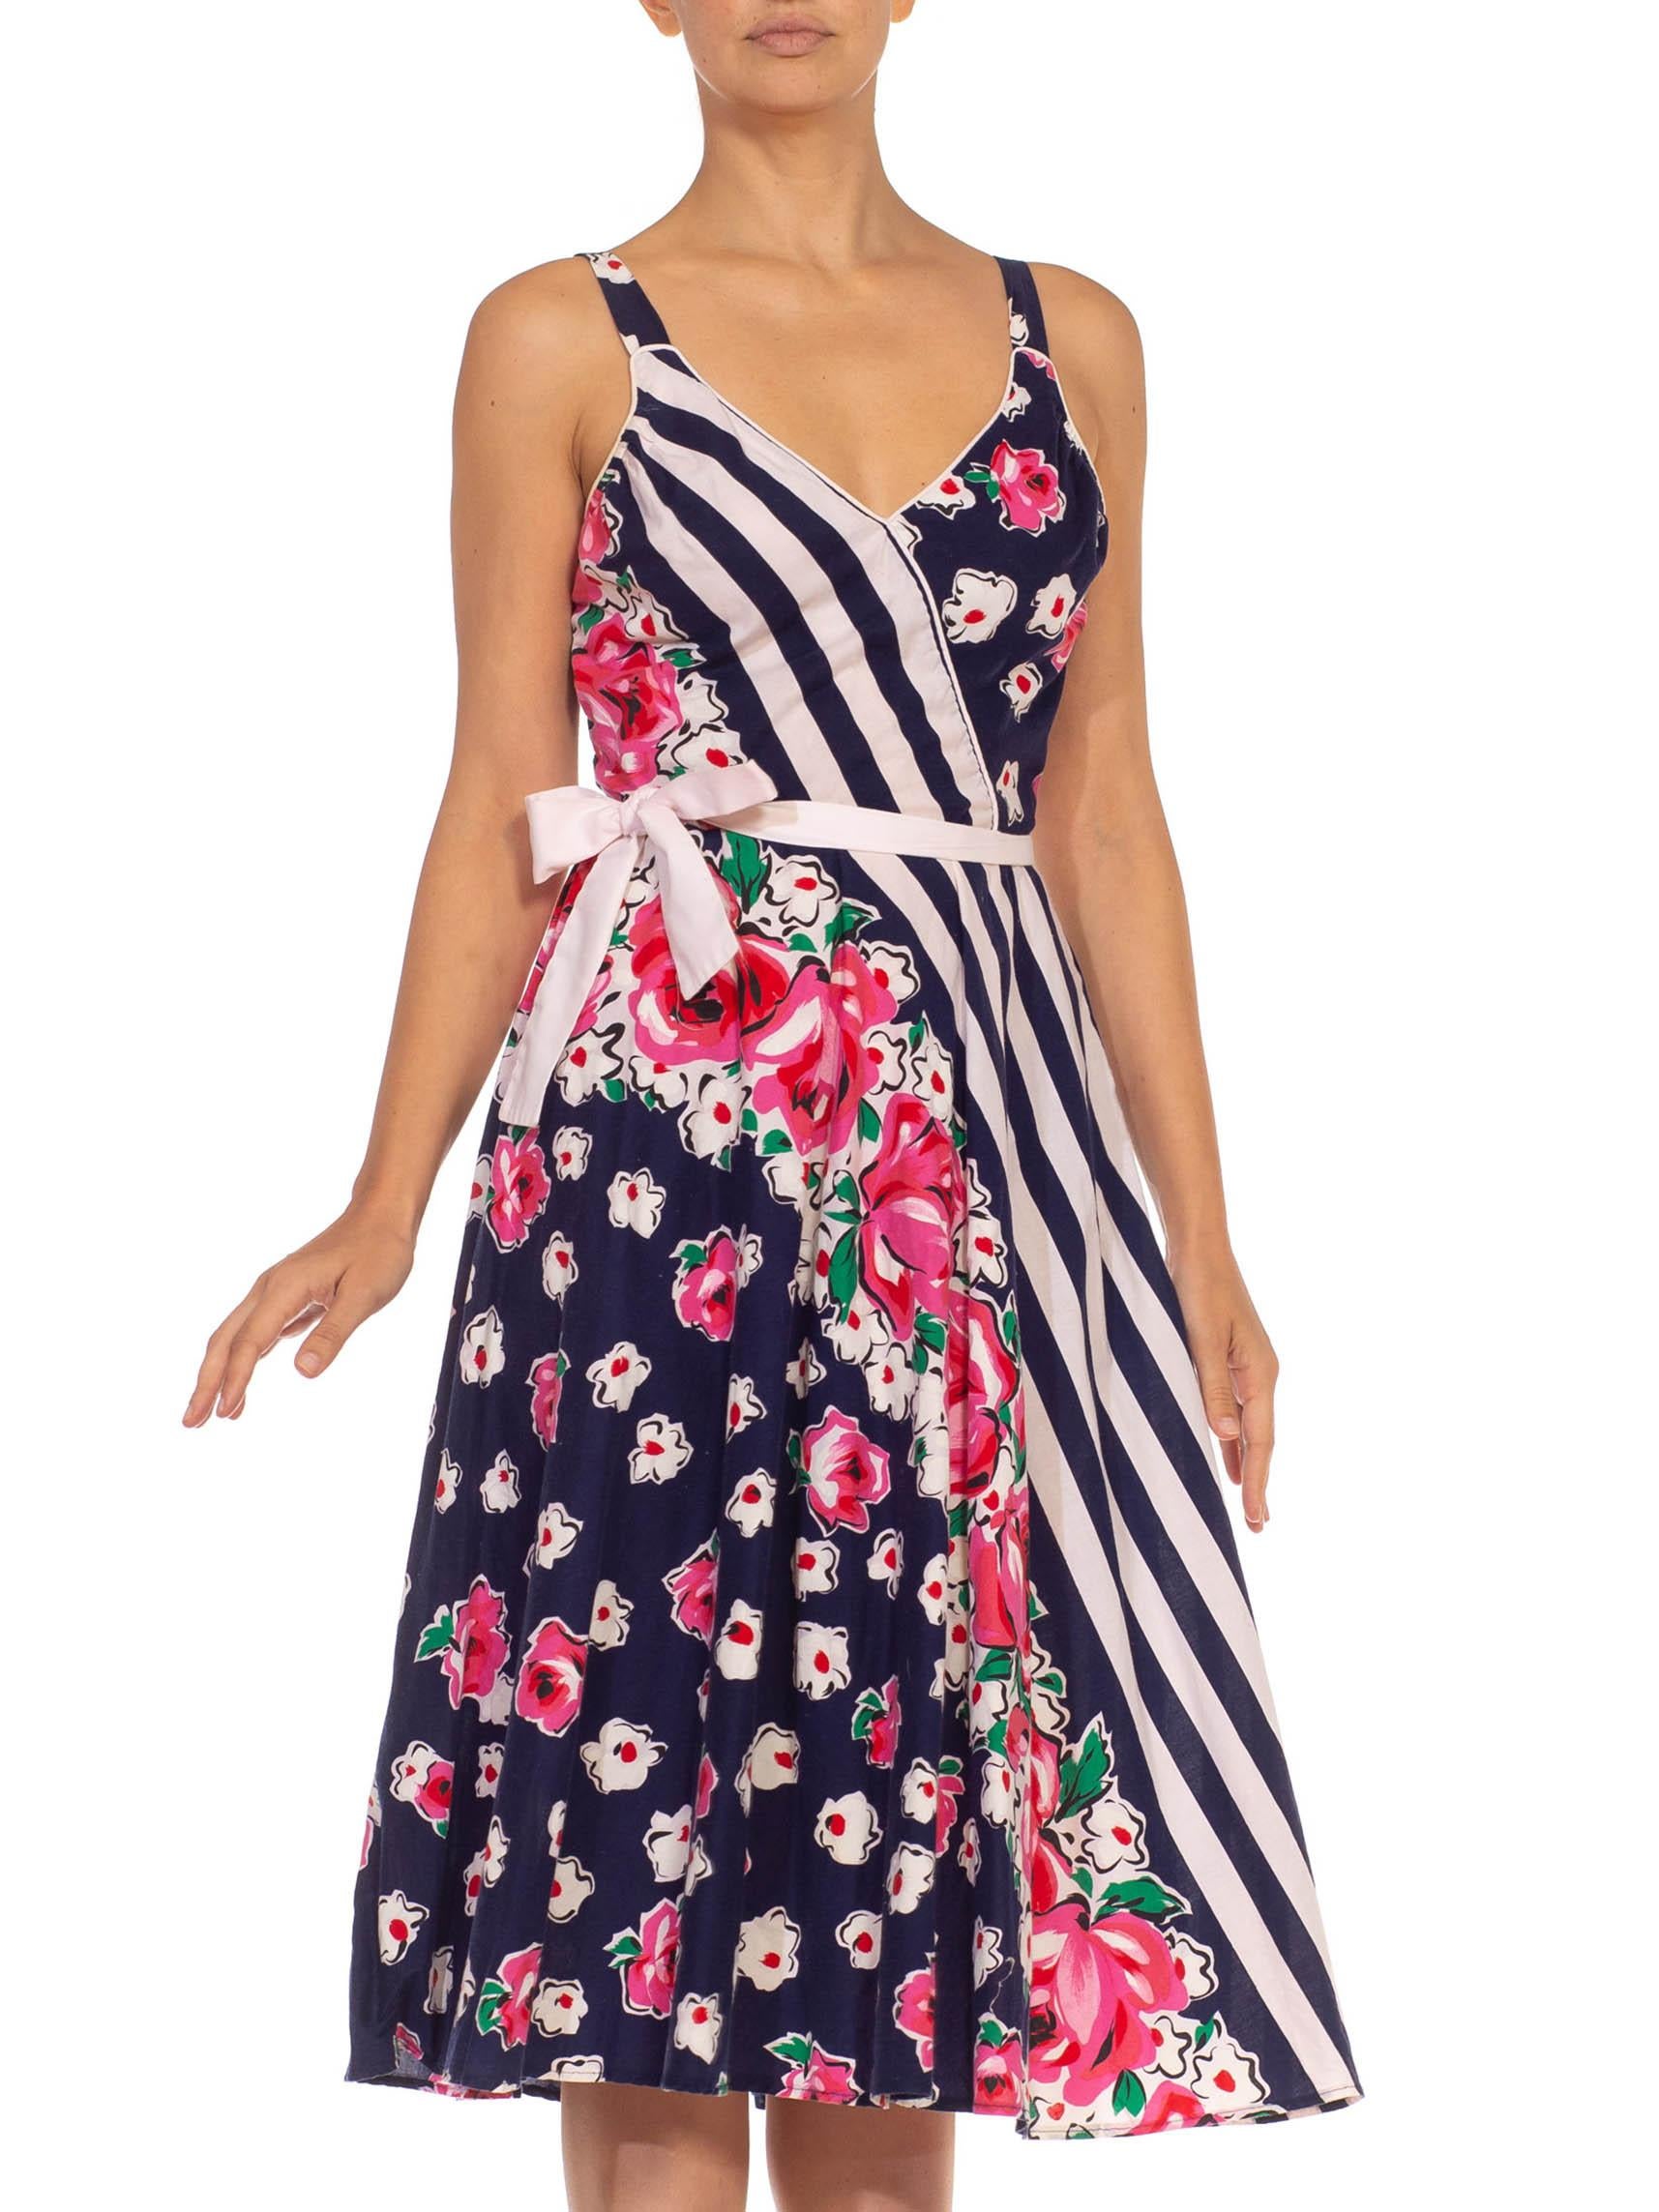 Beige 2000S Navy Blue White & Pink Cotton Stripe Floral Printed Dress Linen With Bra For Sale